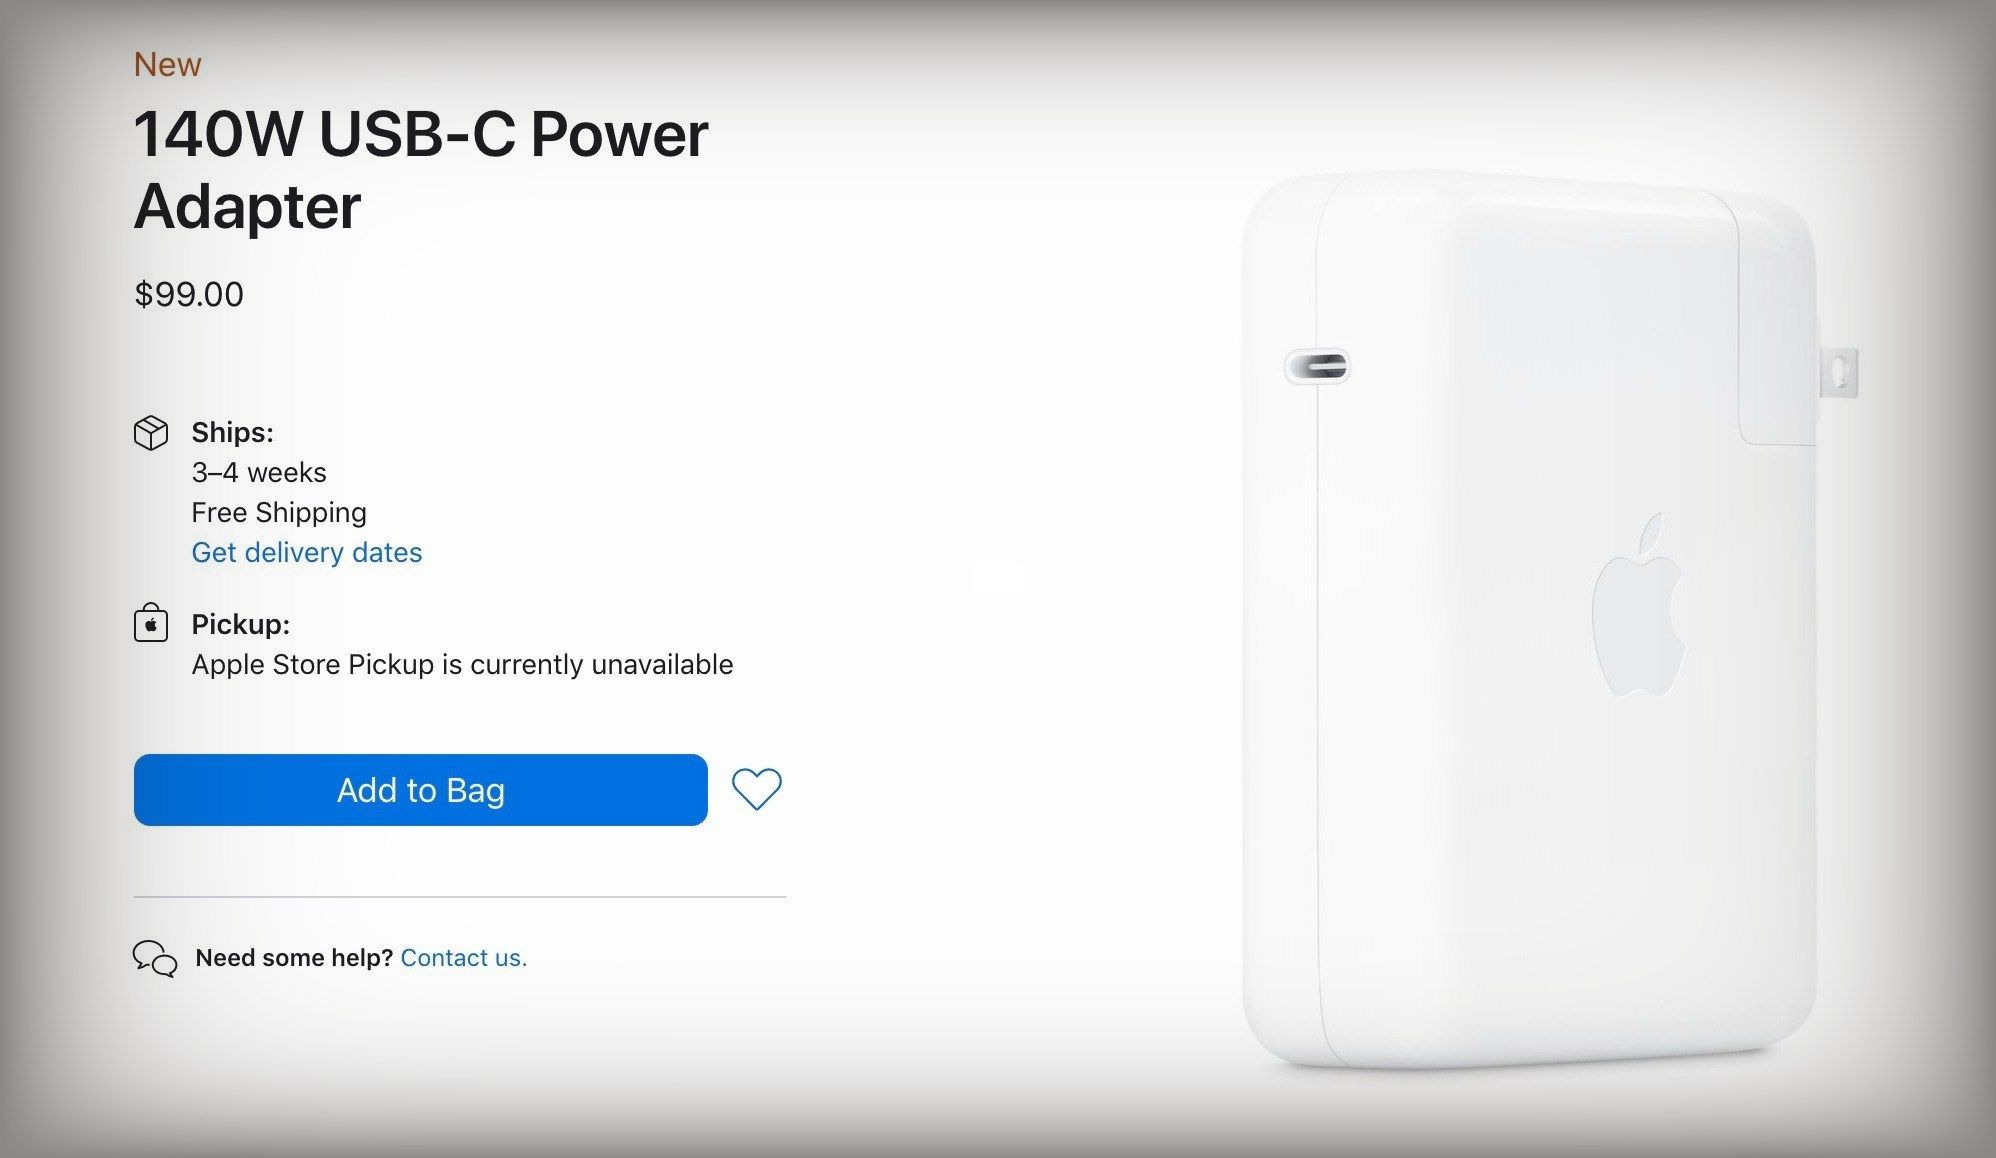 Apple's 140W Power Adapter is Company's First GaN Charger, Supports USB-C Power Delivery 3.1